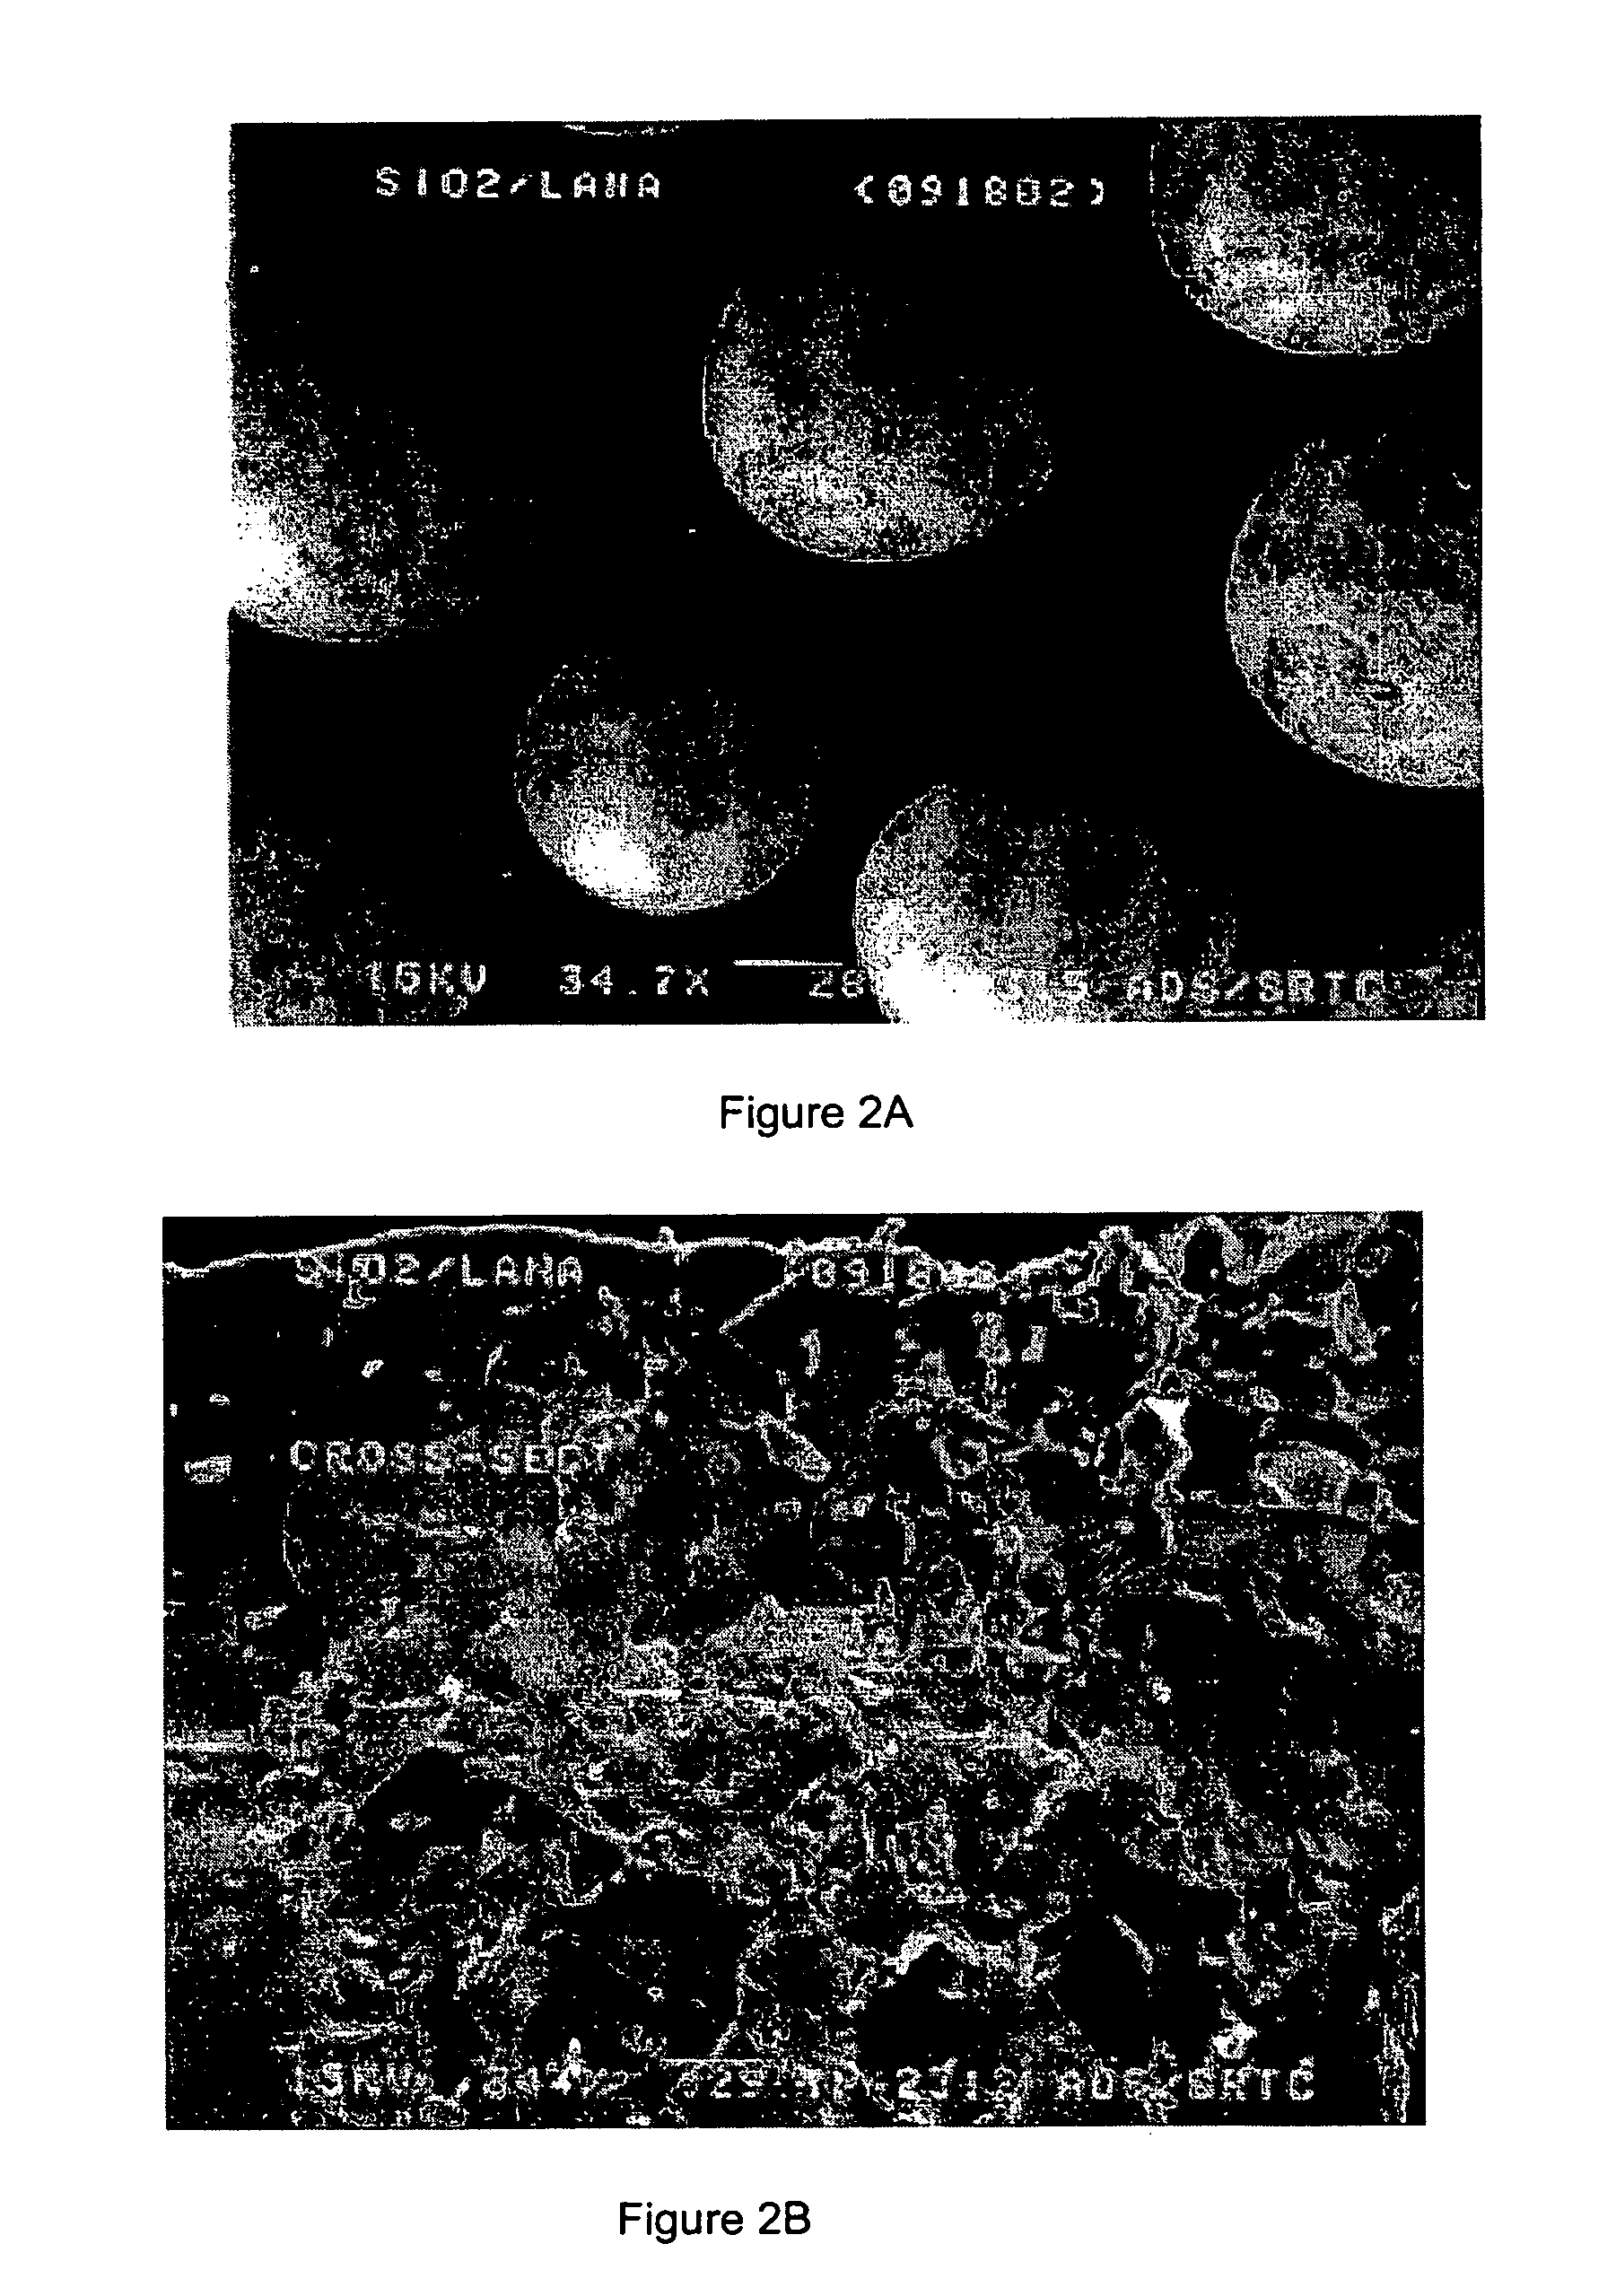 Process of forming a sol-gel/metal hydride composite